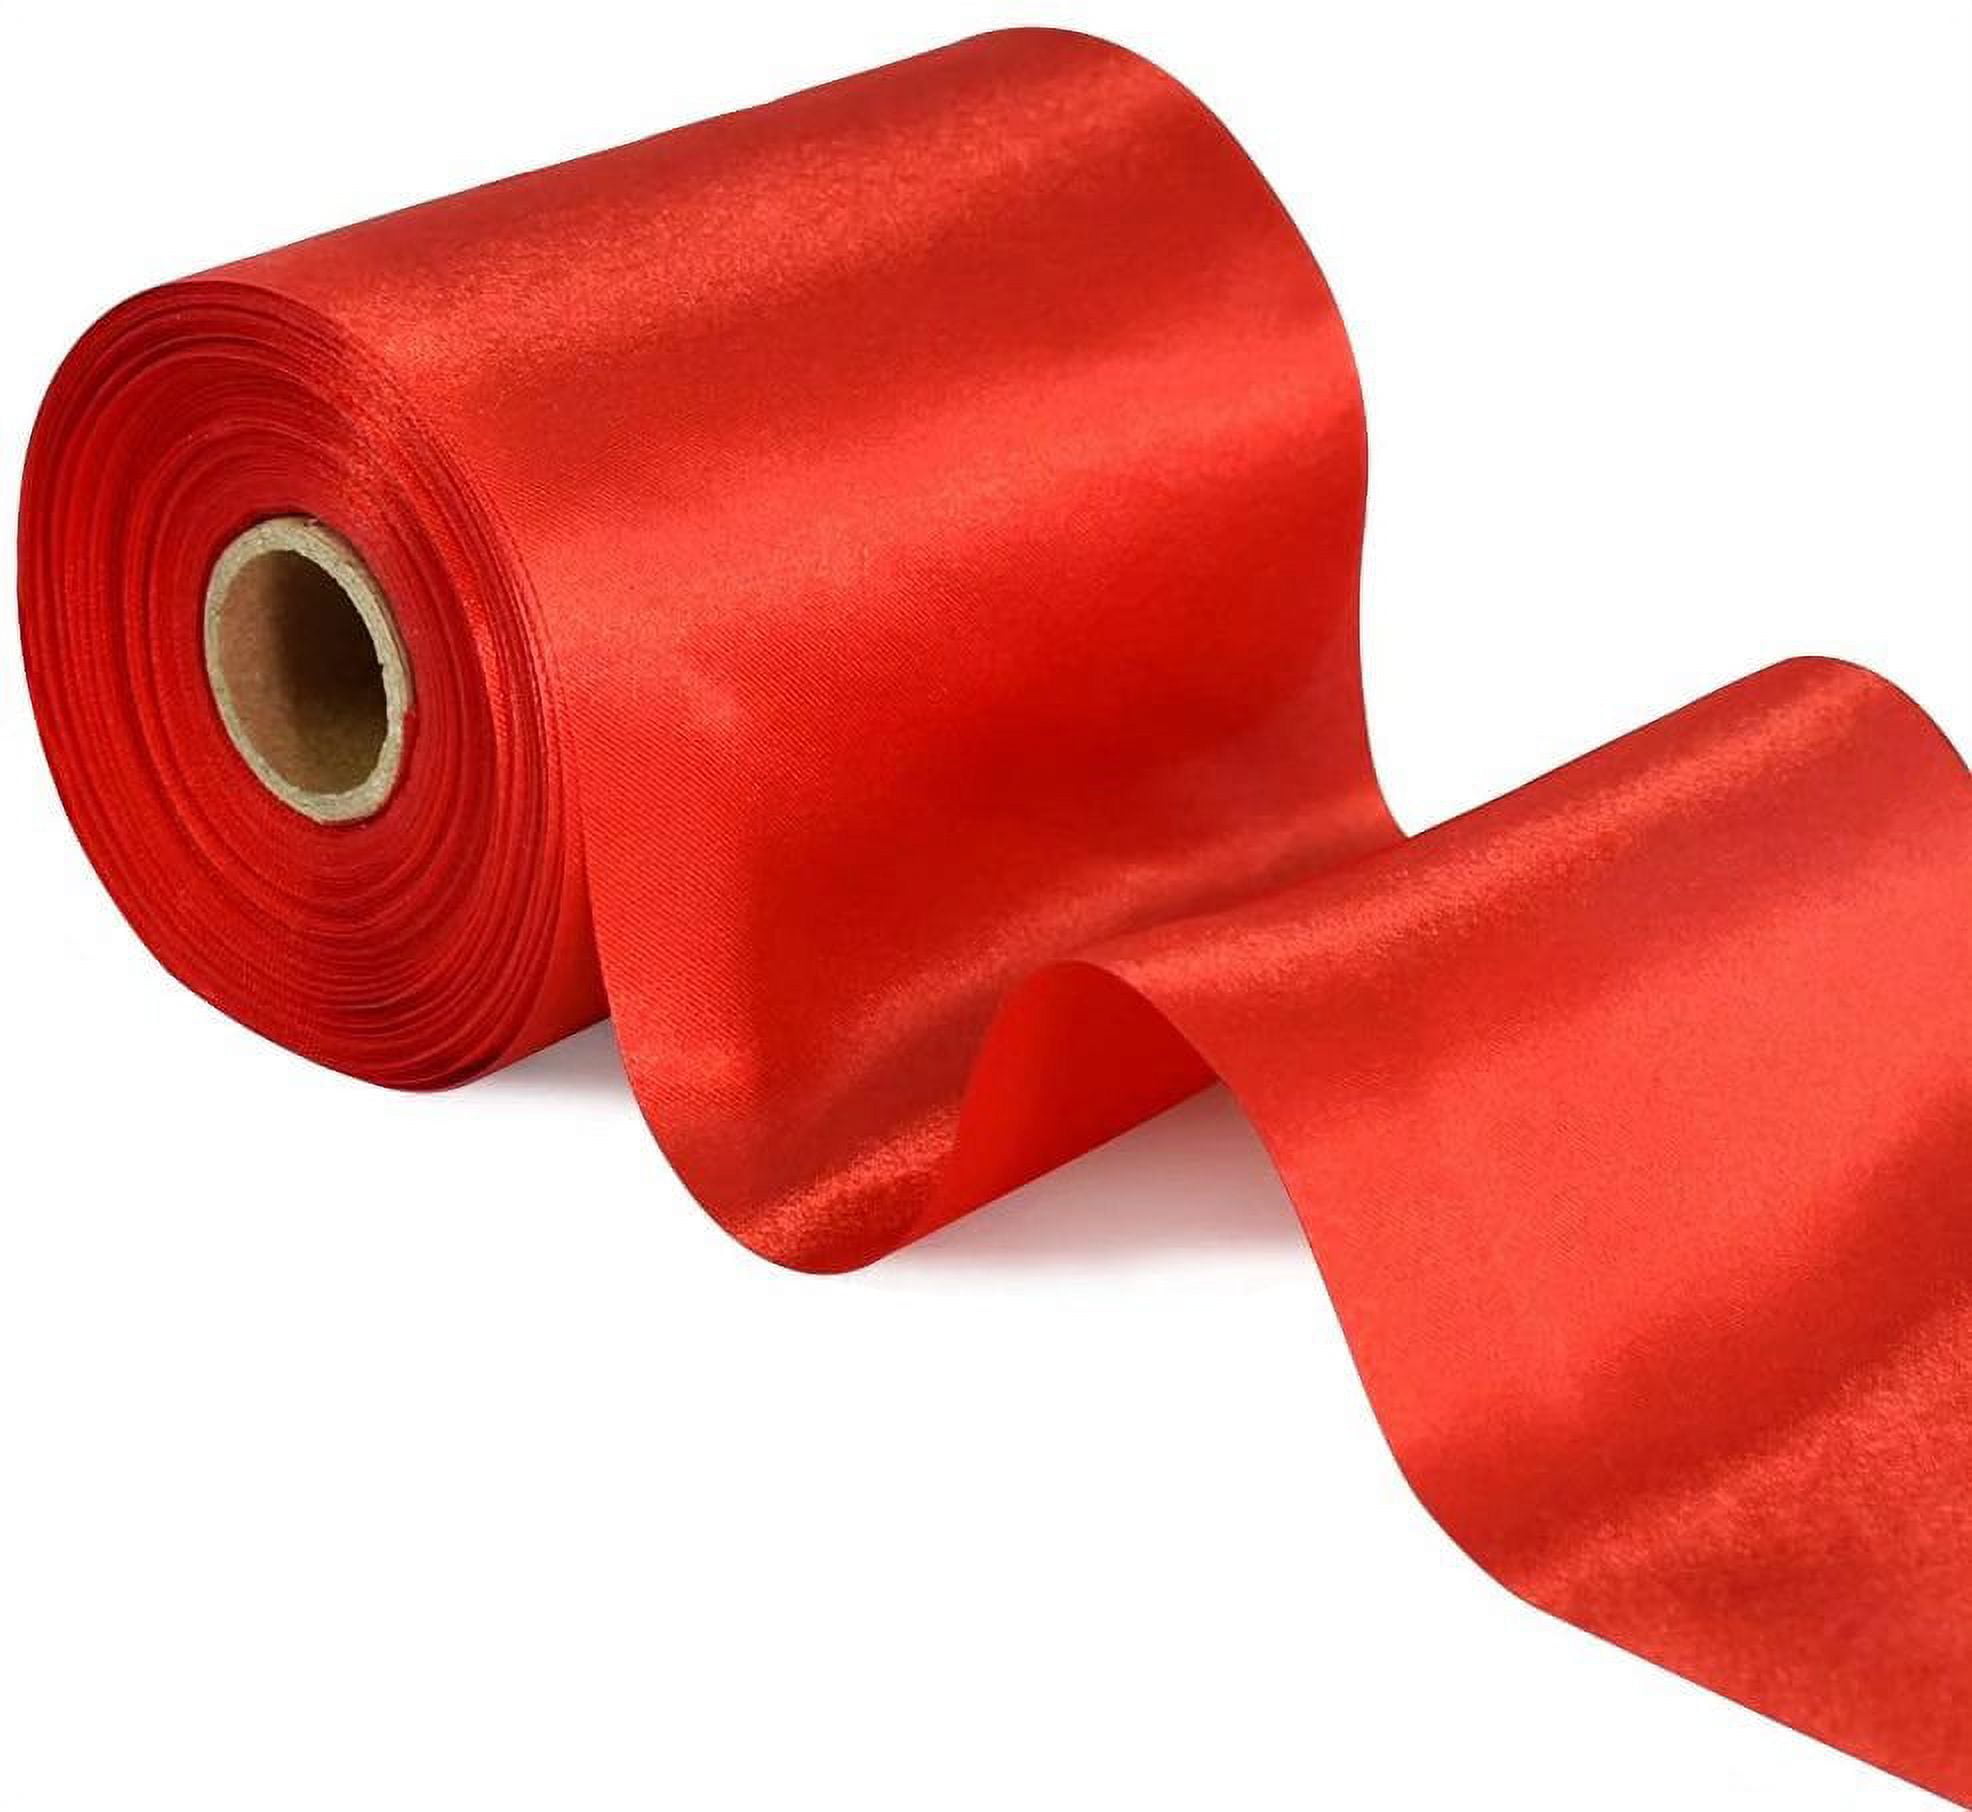 Wide Red Satin Hair Ribbon for Crafts 4 Inch x 22Yards Solid